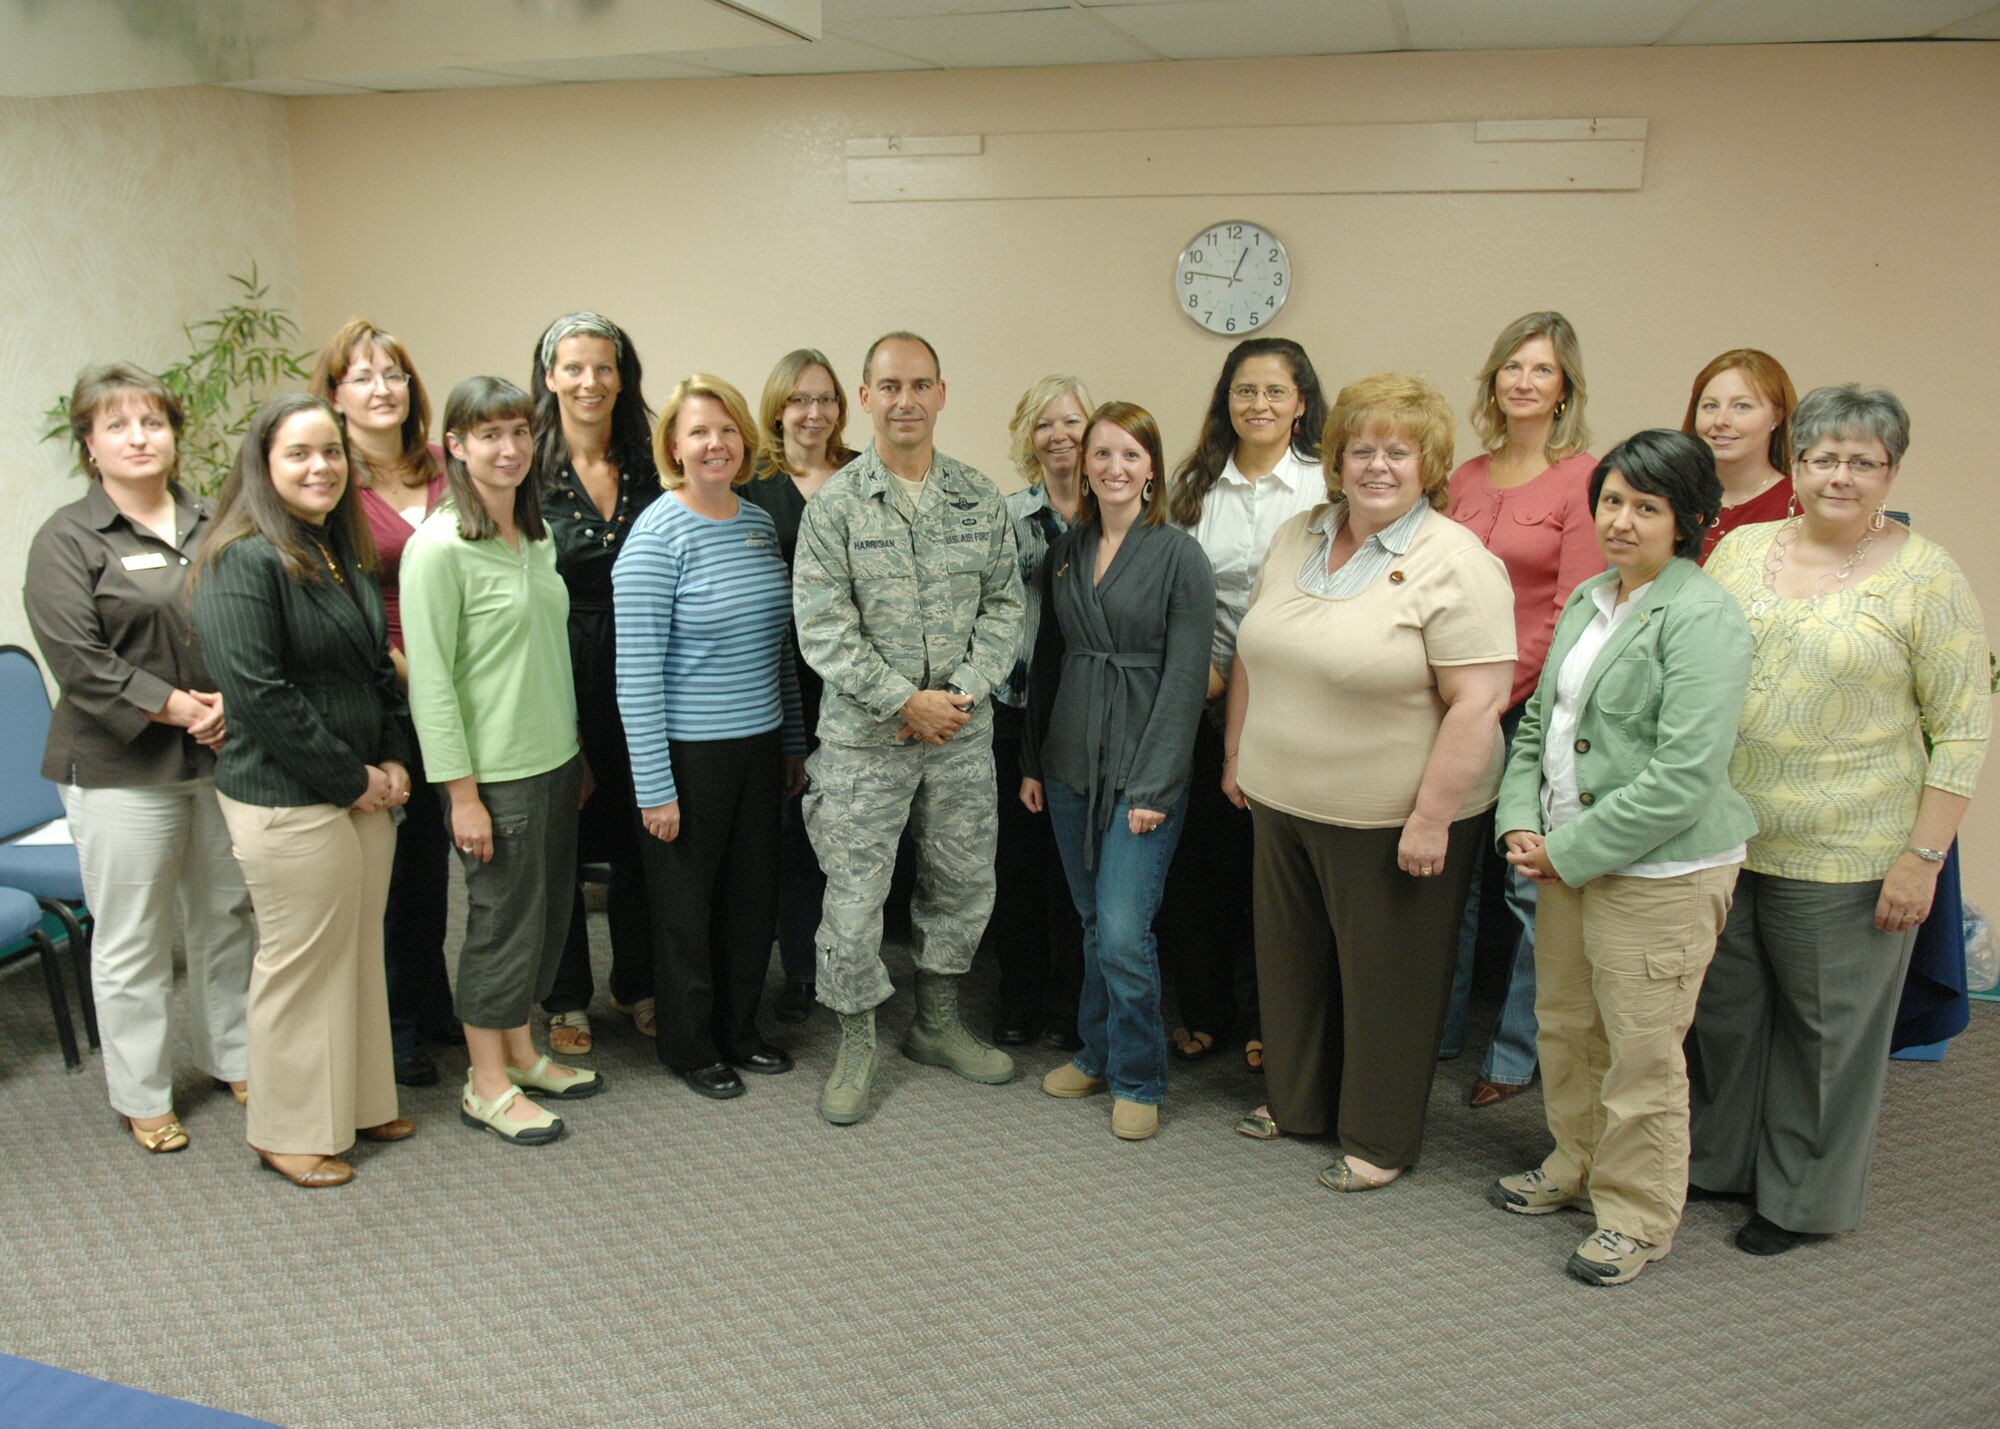 Col. Jeff Harrigian, 49th Fighter Wing commander, pose for a picture with attendees of the Heartlink seminar at the Airman Family Readiness Center at Holloman Air Force Base, N.M., April 3, 2009. Heartlink provides Holloman spouses a chance to learn about the Air Force and meet new people. (U.S. Air Force photo/SSgt Anthony Nelson Jr)